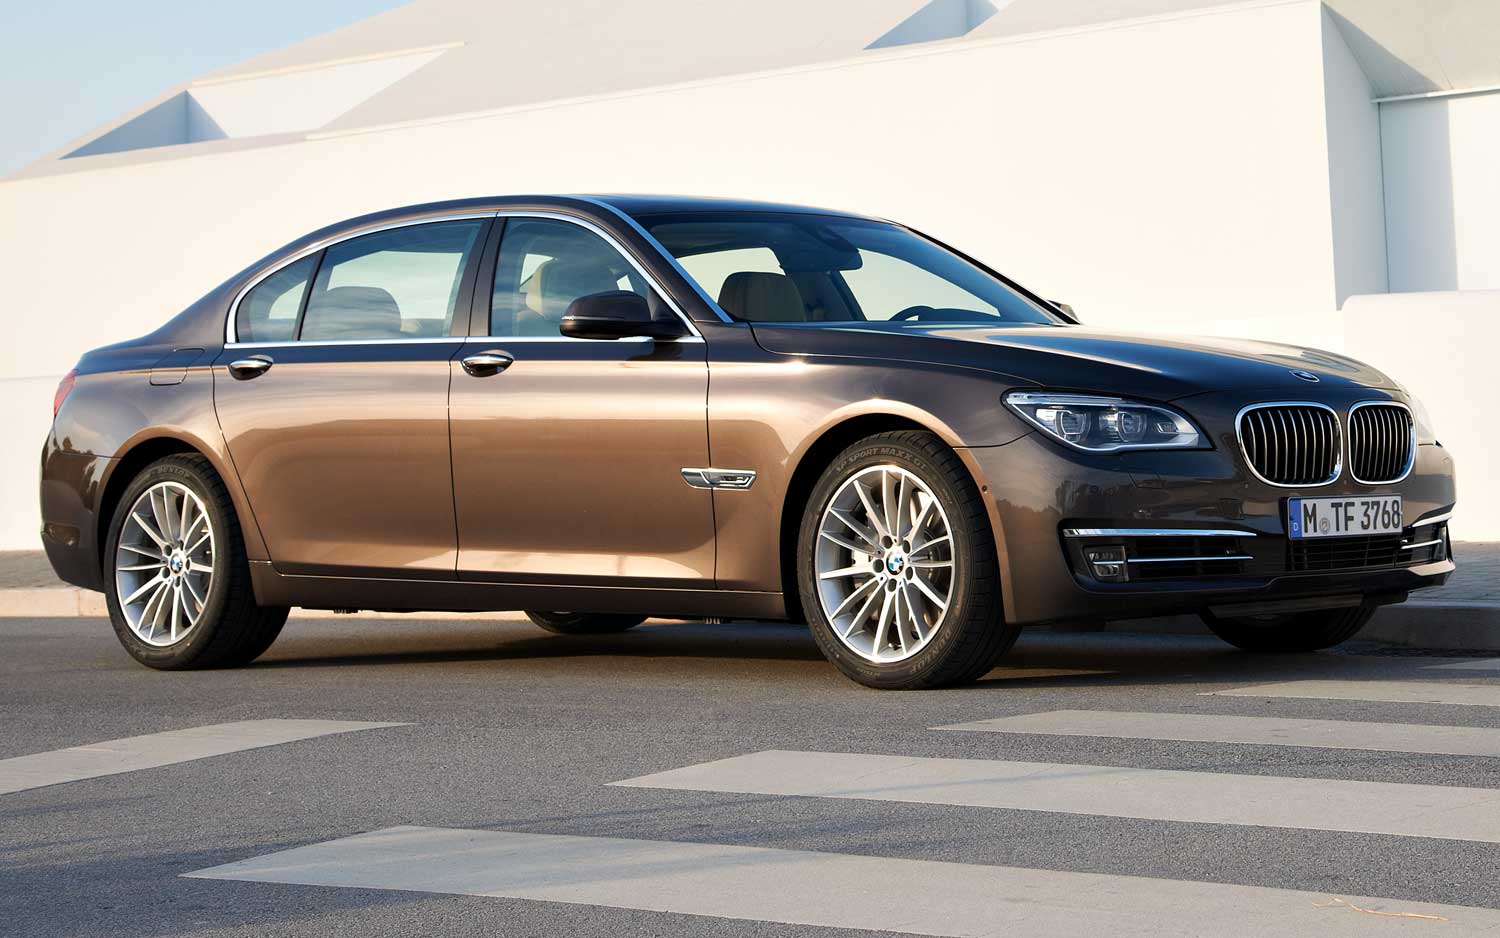 Refreshed 2013 BMW 7 Series Gets Updated Engines, 750i Has 445 HP and 8A